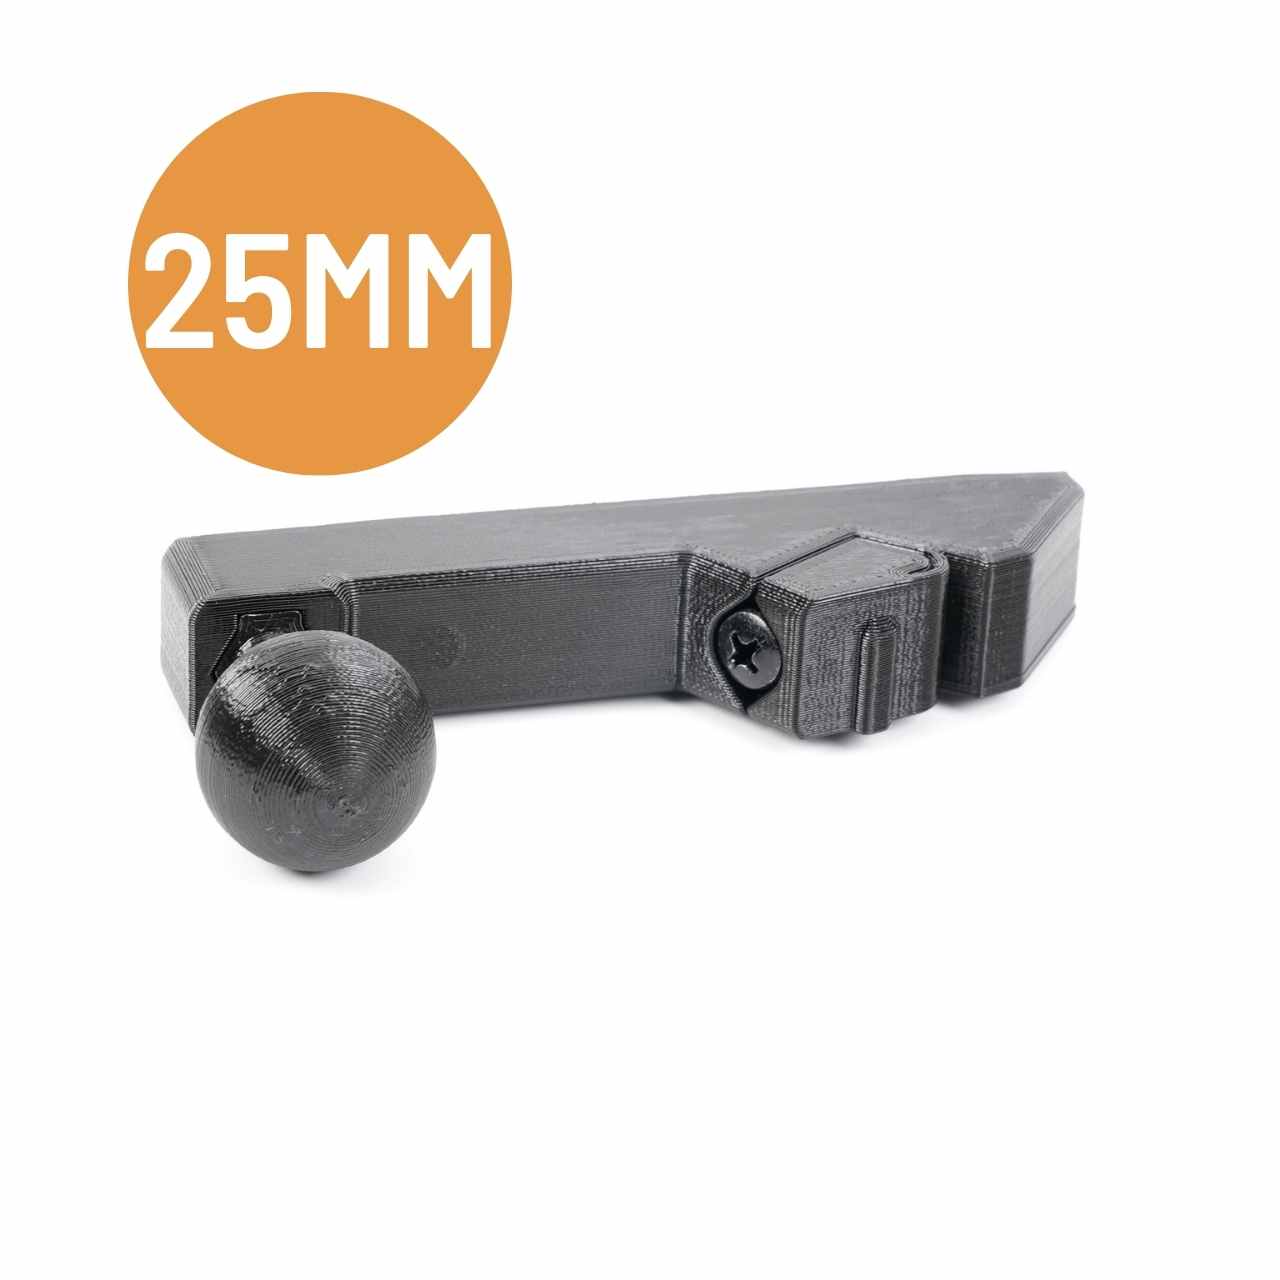 Anchor with 25mm (1") ball mount for RAM accessories